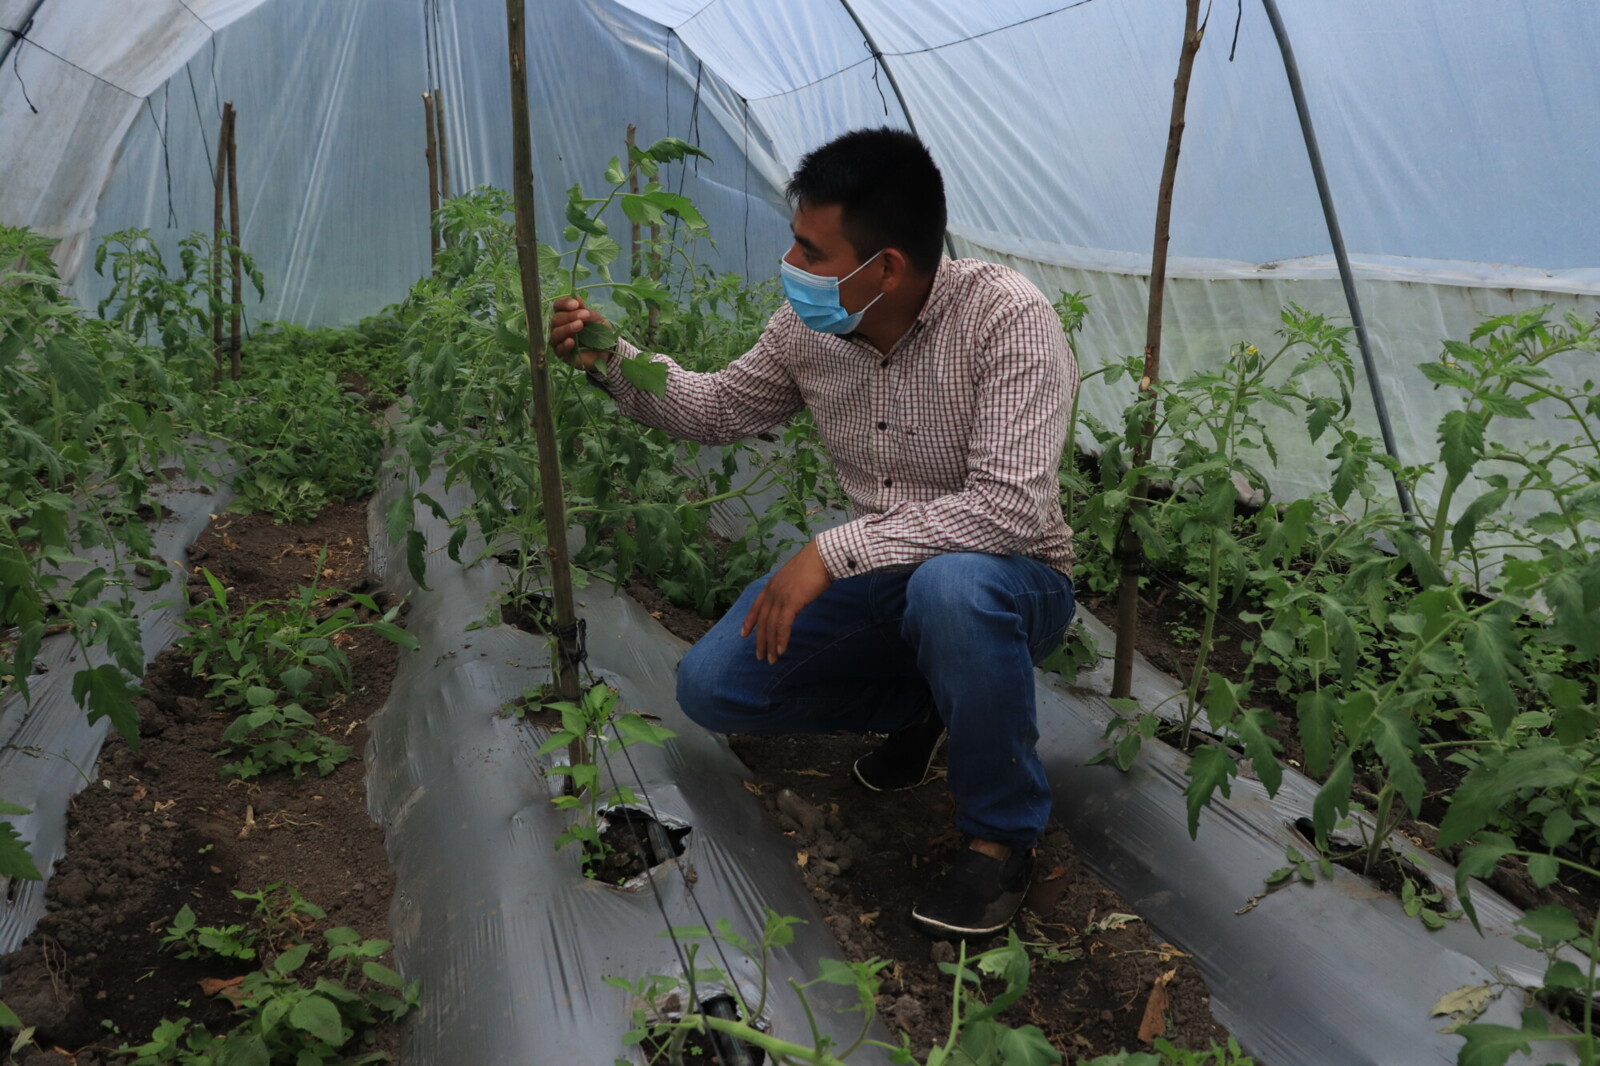 Update: Cultivating collective resilience in Guatemala